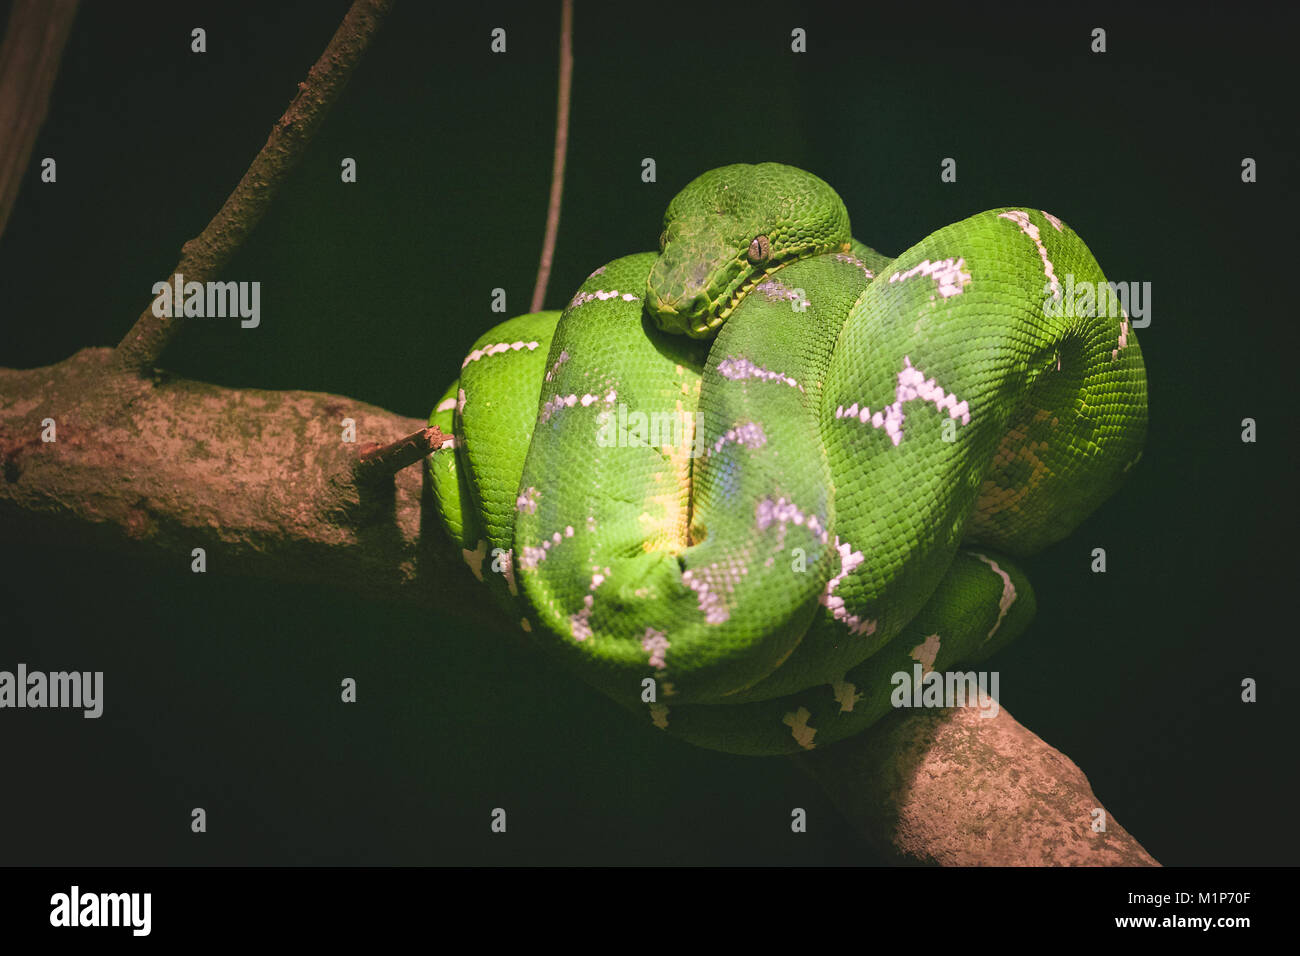 Close up image of a green tree boa wrapped around a branch Stock Photo